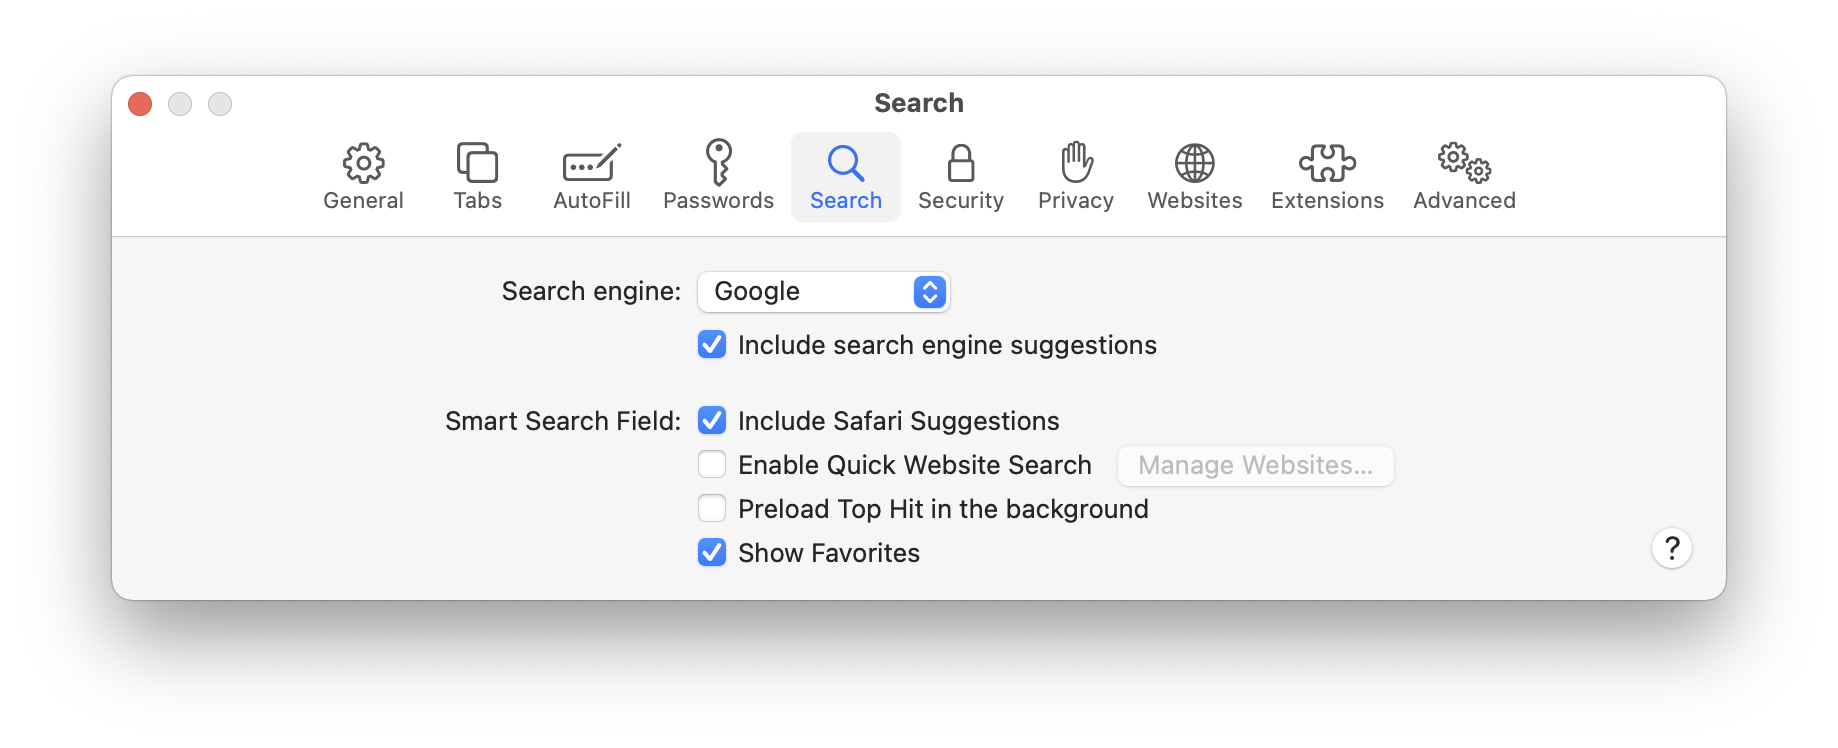 list of specialized search engines